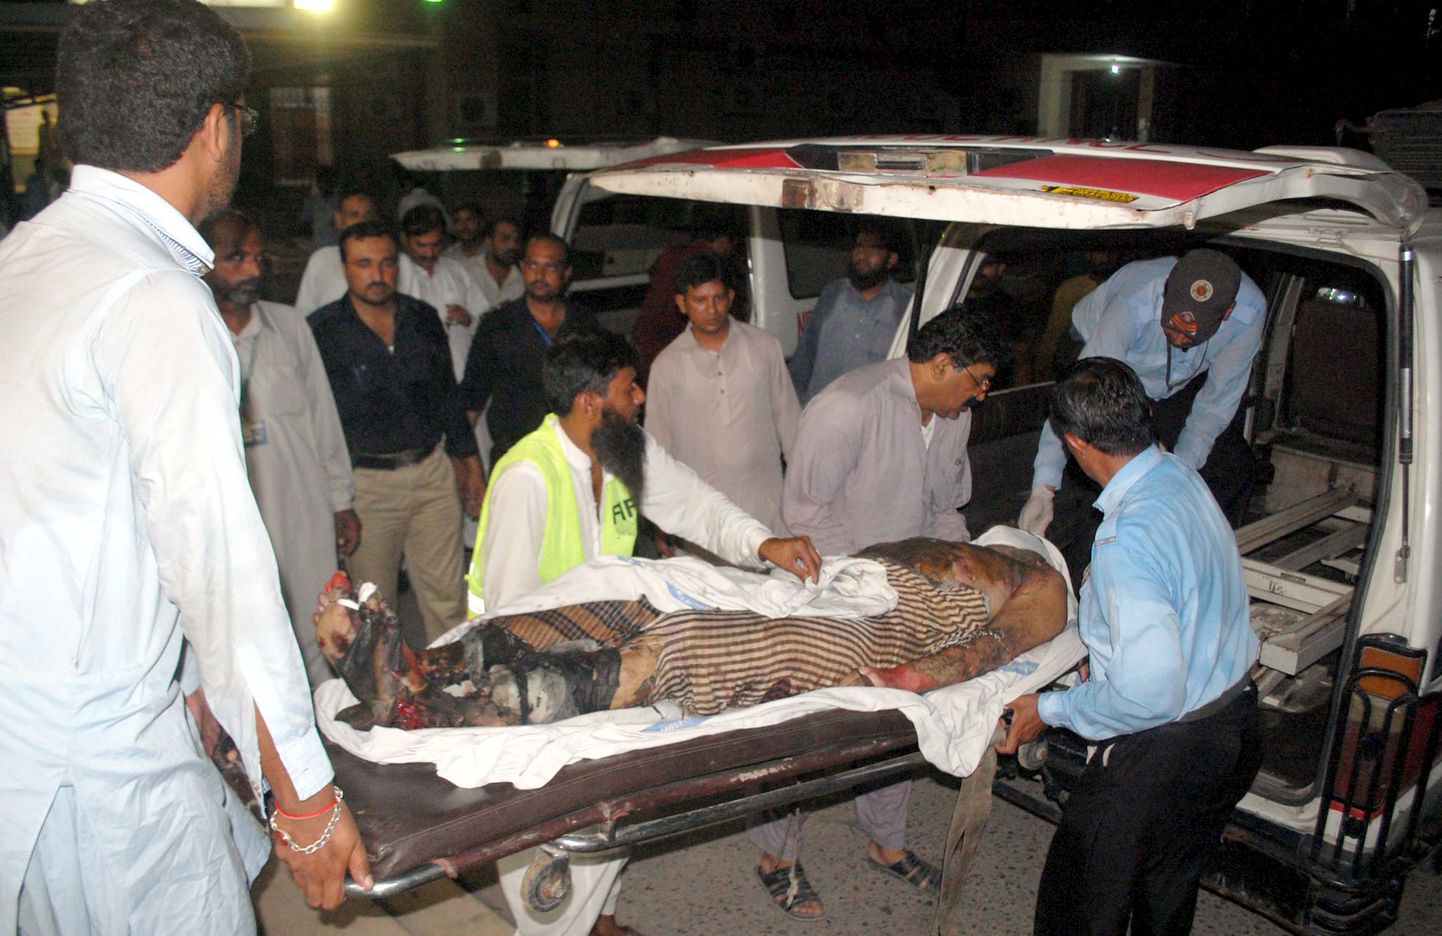 ATTENTION EDITORS - VISUAL COVERAGE OF SCENES OF INJURY OR DEATH    Police officers and rescue workers move the body of a victim who was killed in an explosion to a hospital in Multan, Pakistan, September, 13, 2015. Seven people were killed and 43 wounded when an explosion occurred after a motorbike hit a rickshaw. It appeared that the motorbike had been rigged with explosives, police said. REUTERS/K. Chaudhry     TEMPLATE OUT